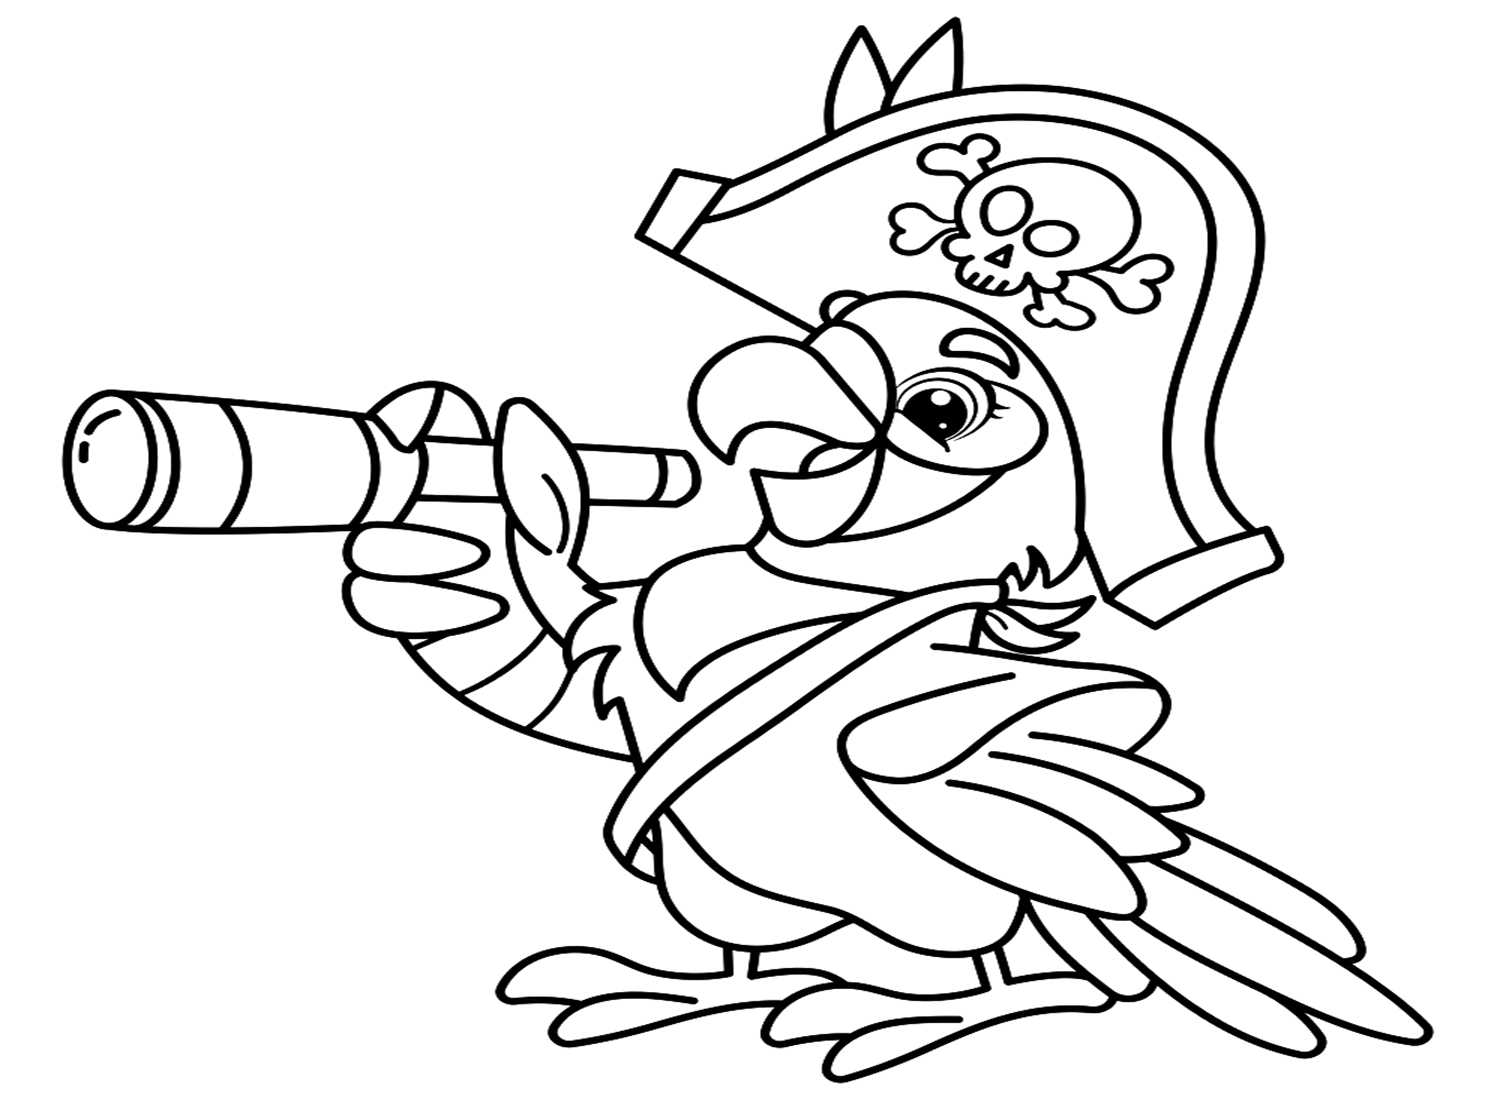 Parrot Pirate Coloring Page